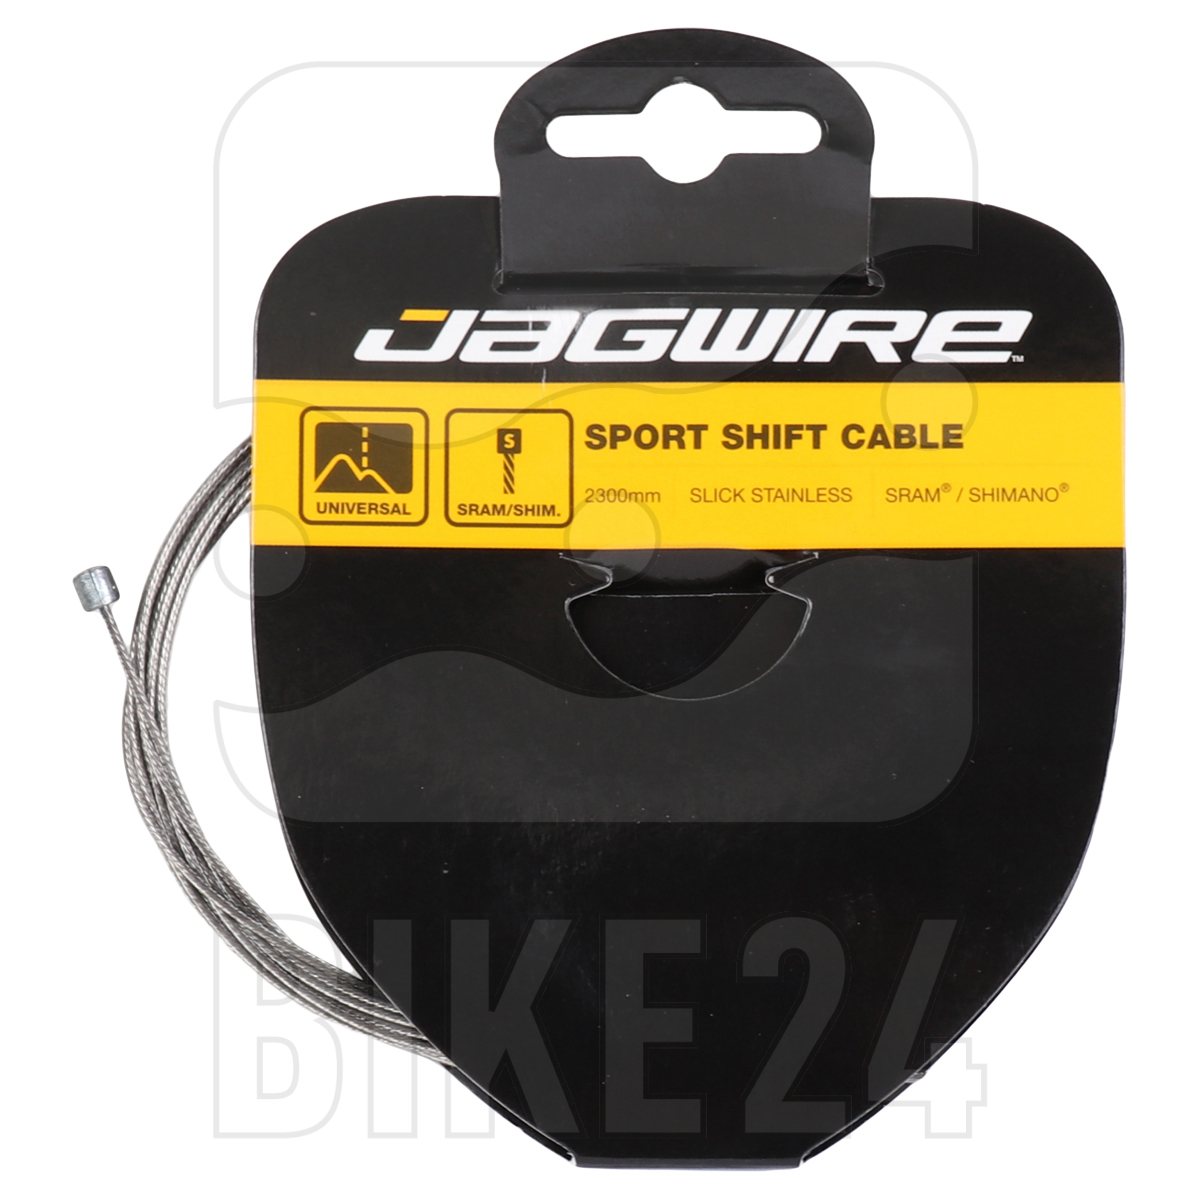 Immagine prodotto da Jagwire Sport Shifting Cable - Stainless Steel, Slick